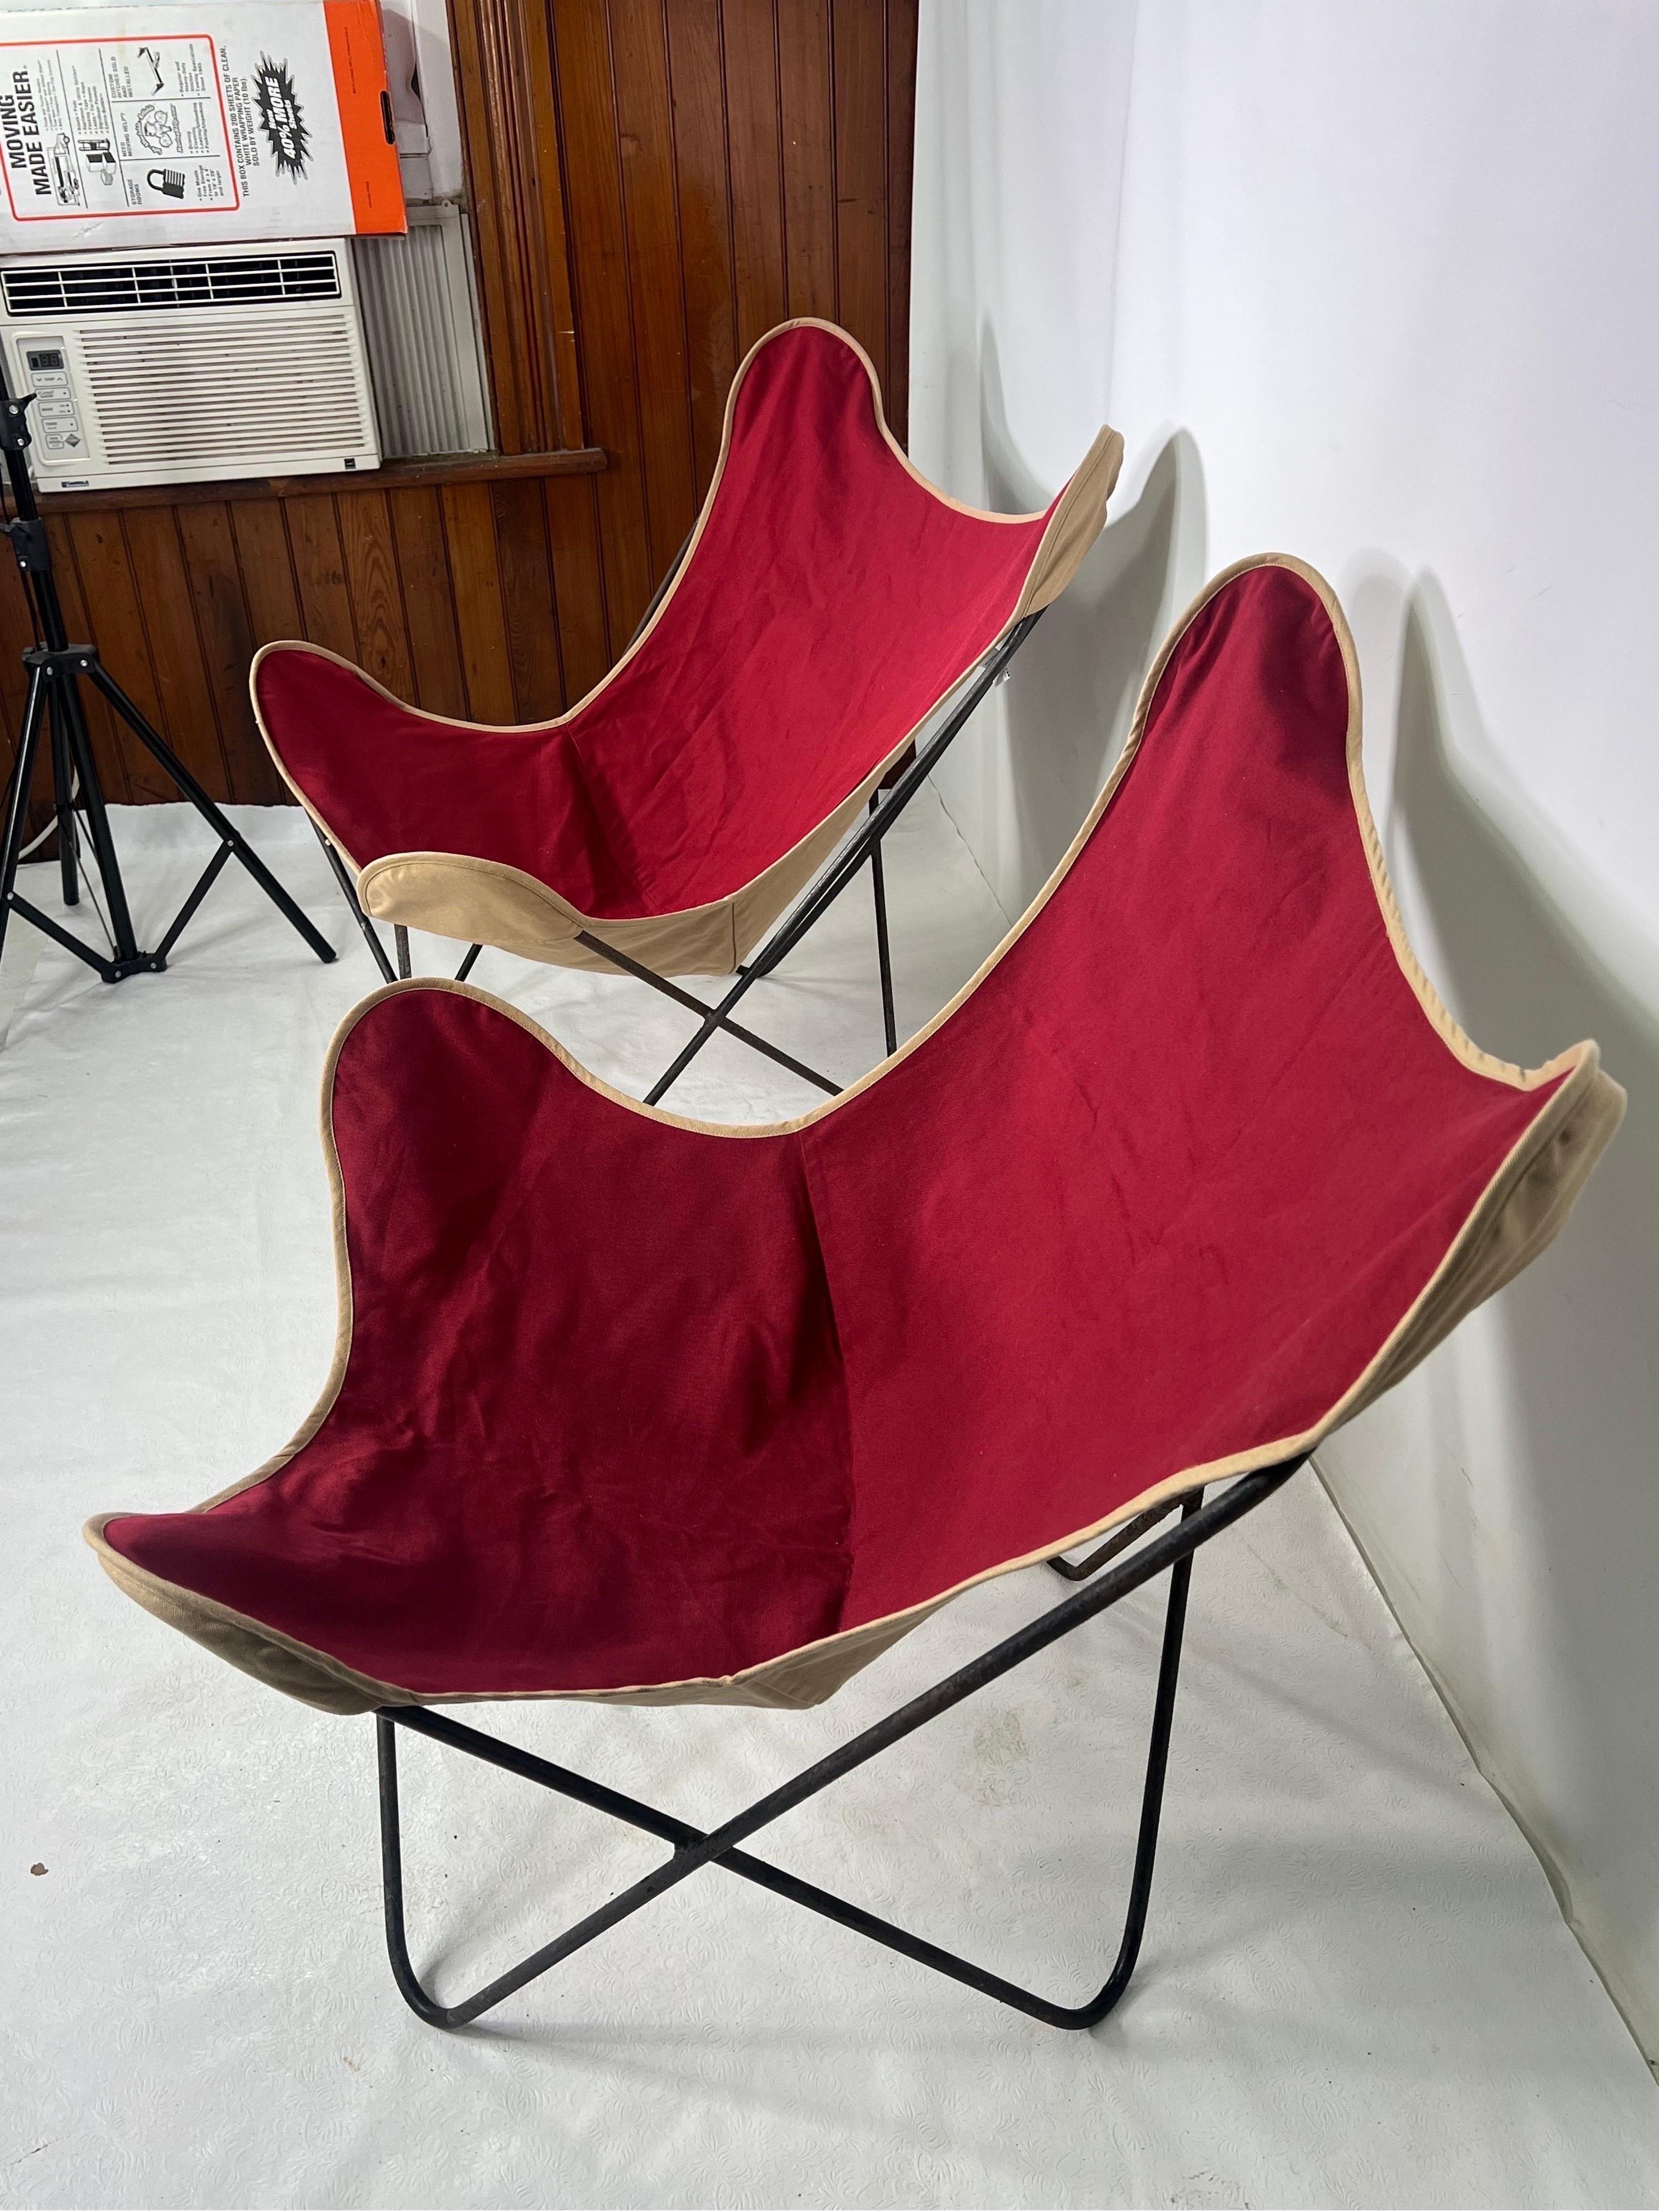 Very nice pair of Butterfly chairs with canvas slings. The slings have been replaced recently and are made out of cotton.